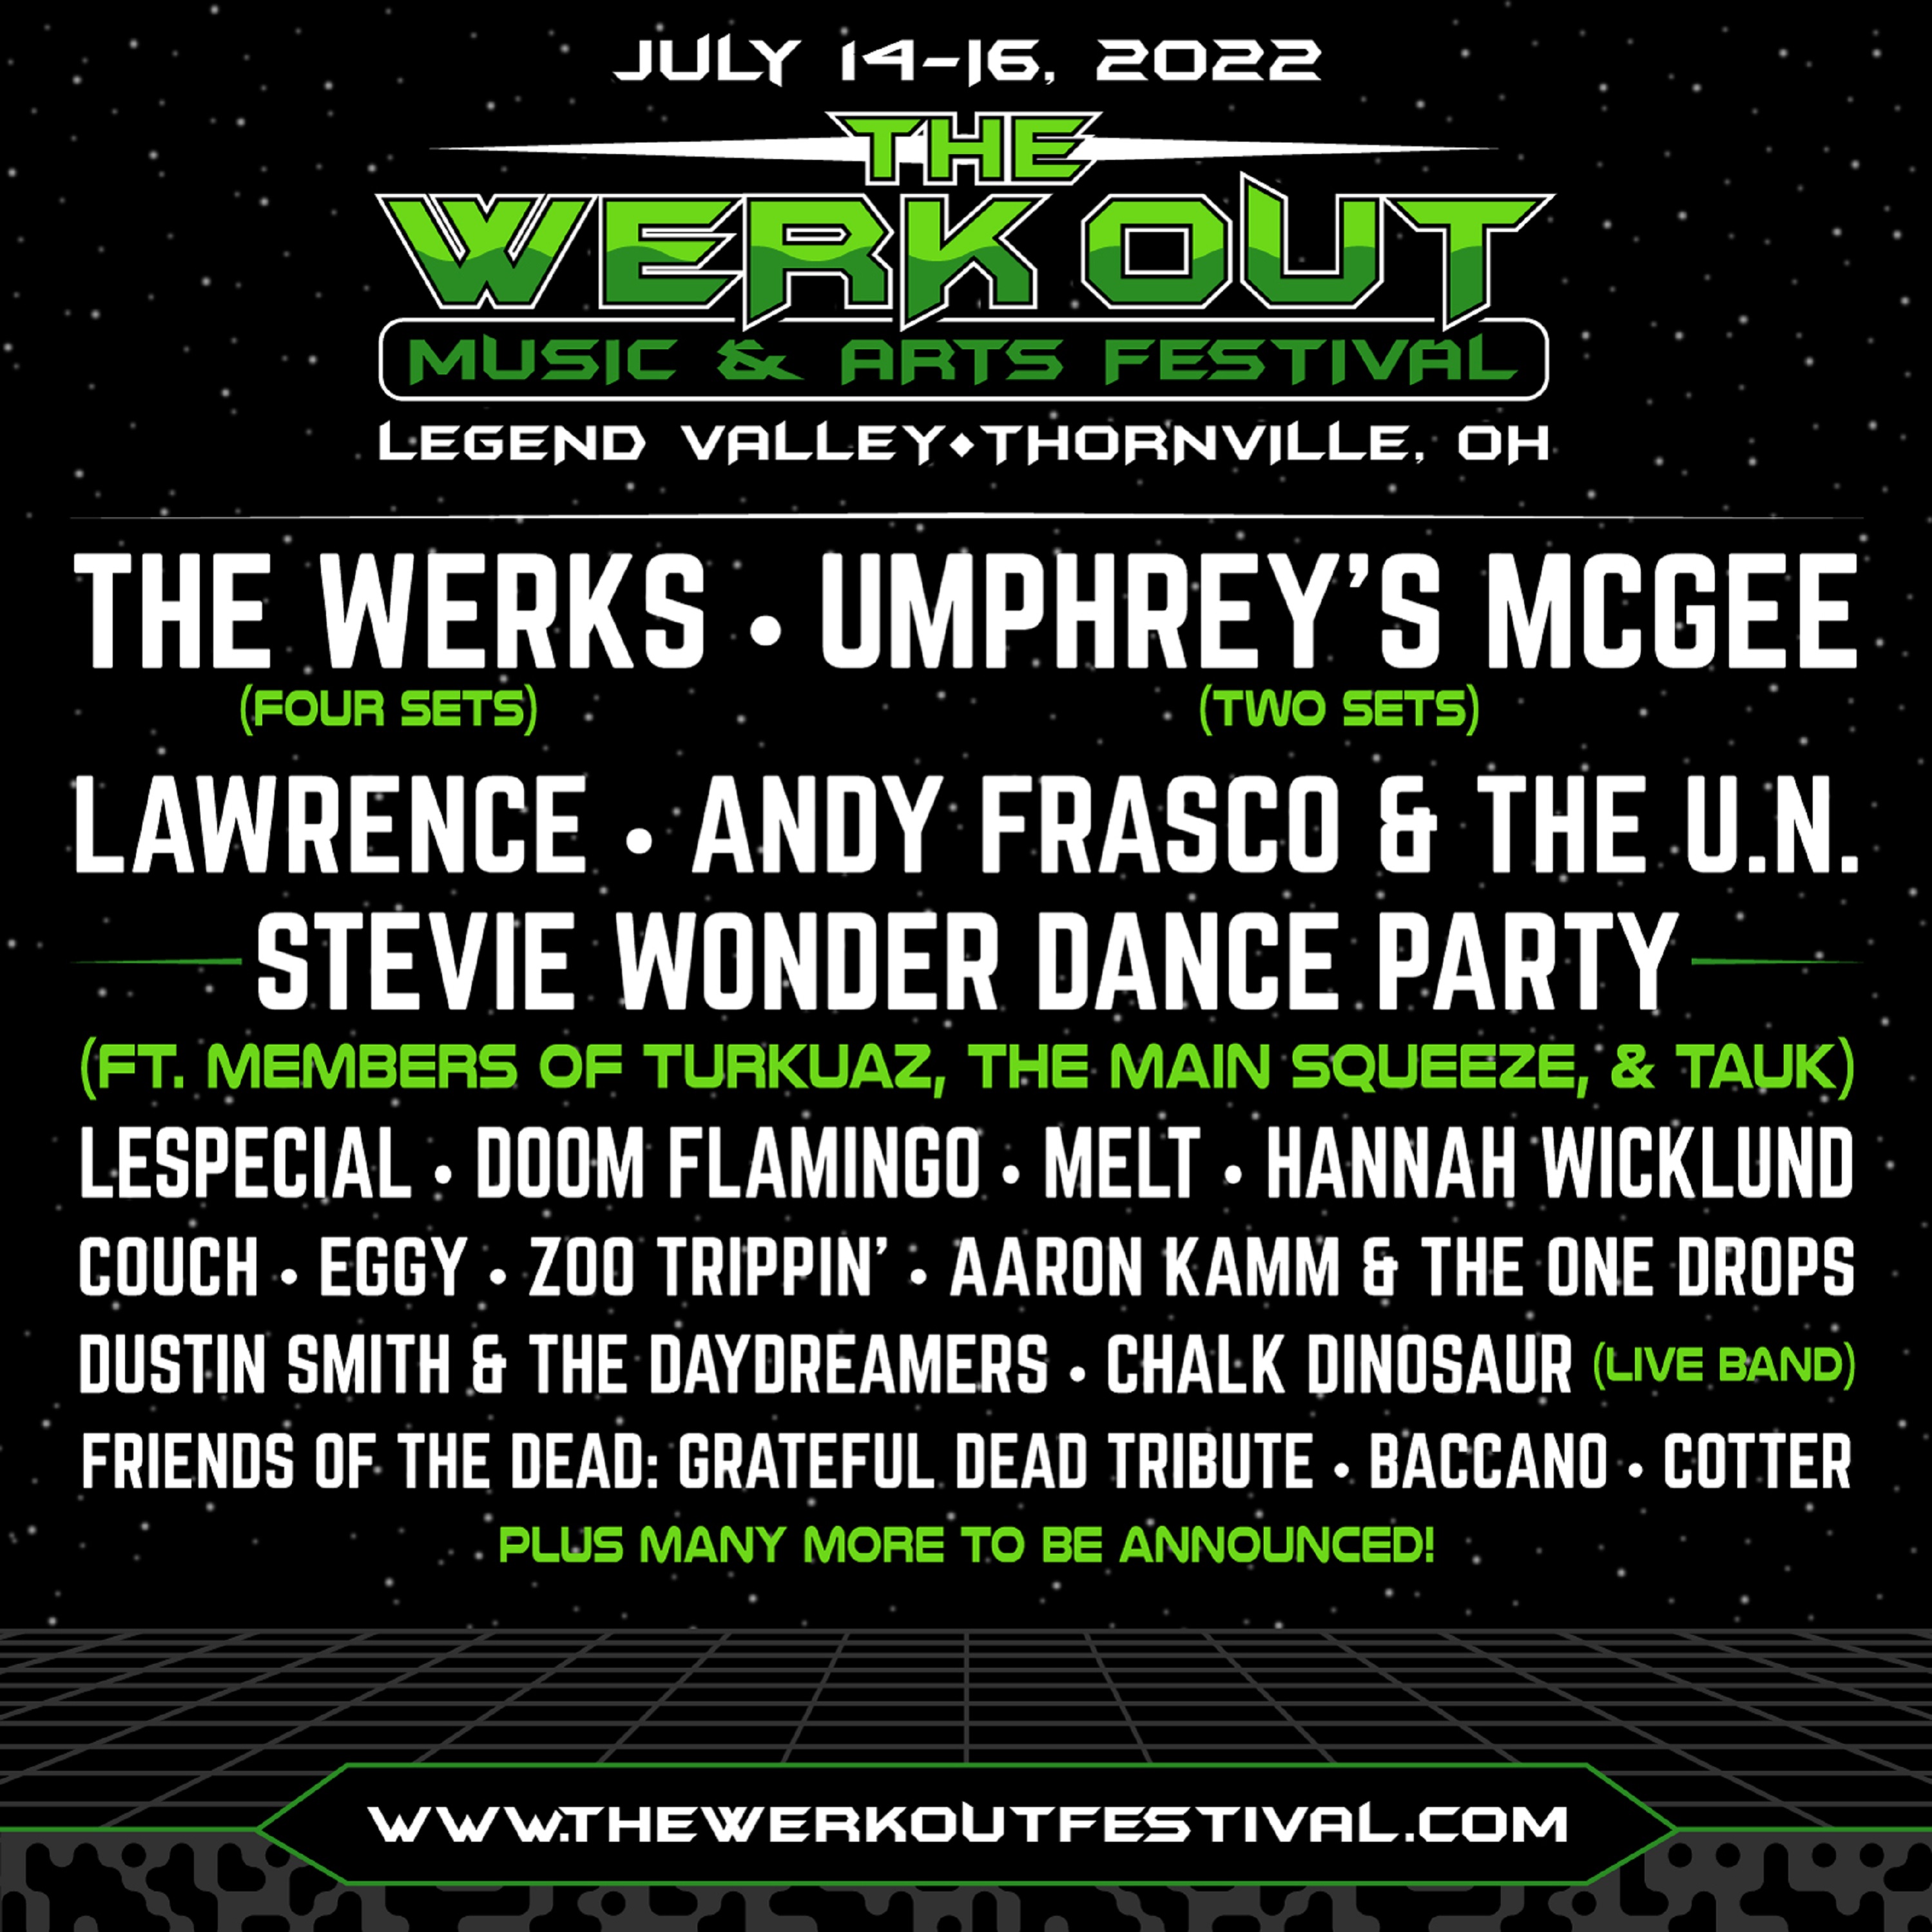 Announcing the Initial Lineup for The Werk Out Festival 2022